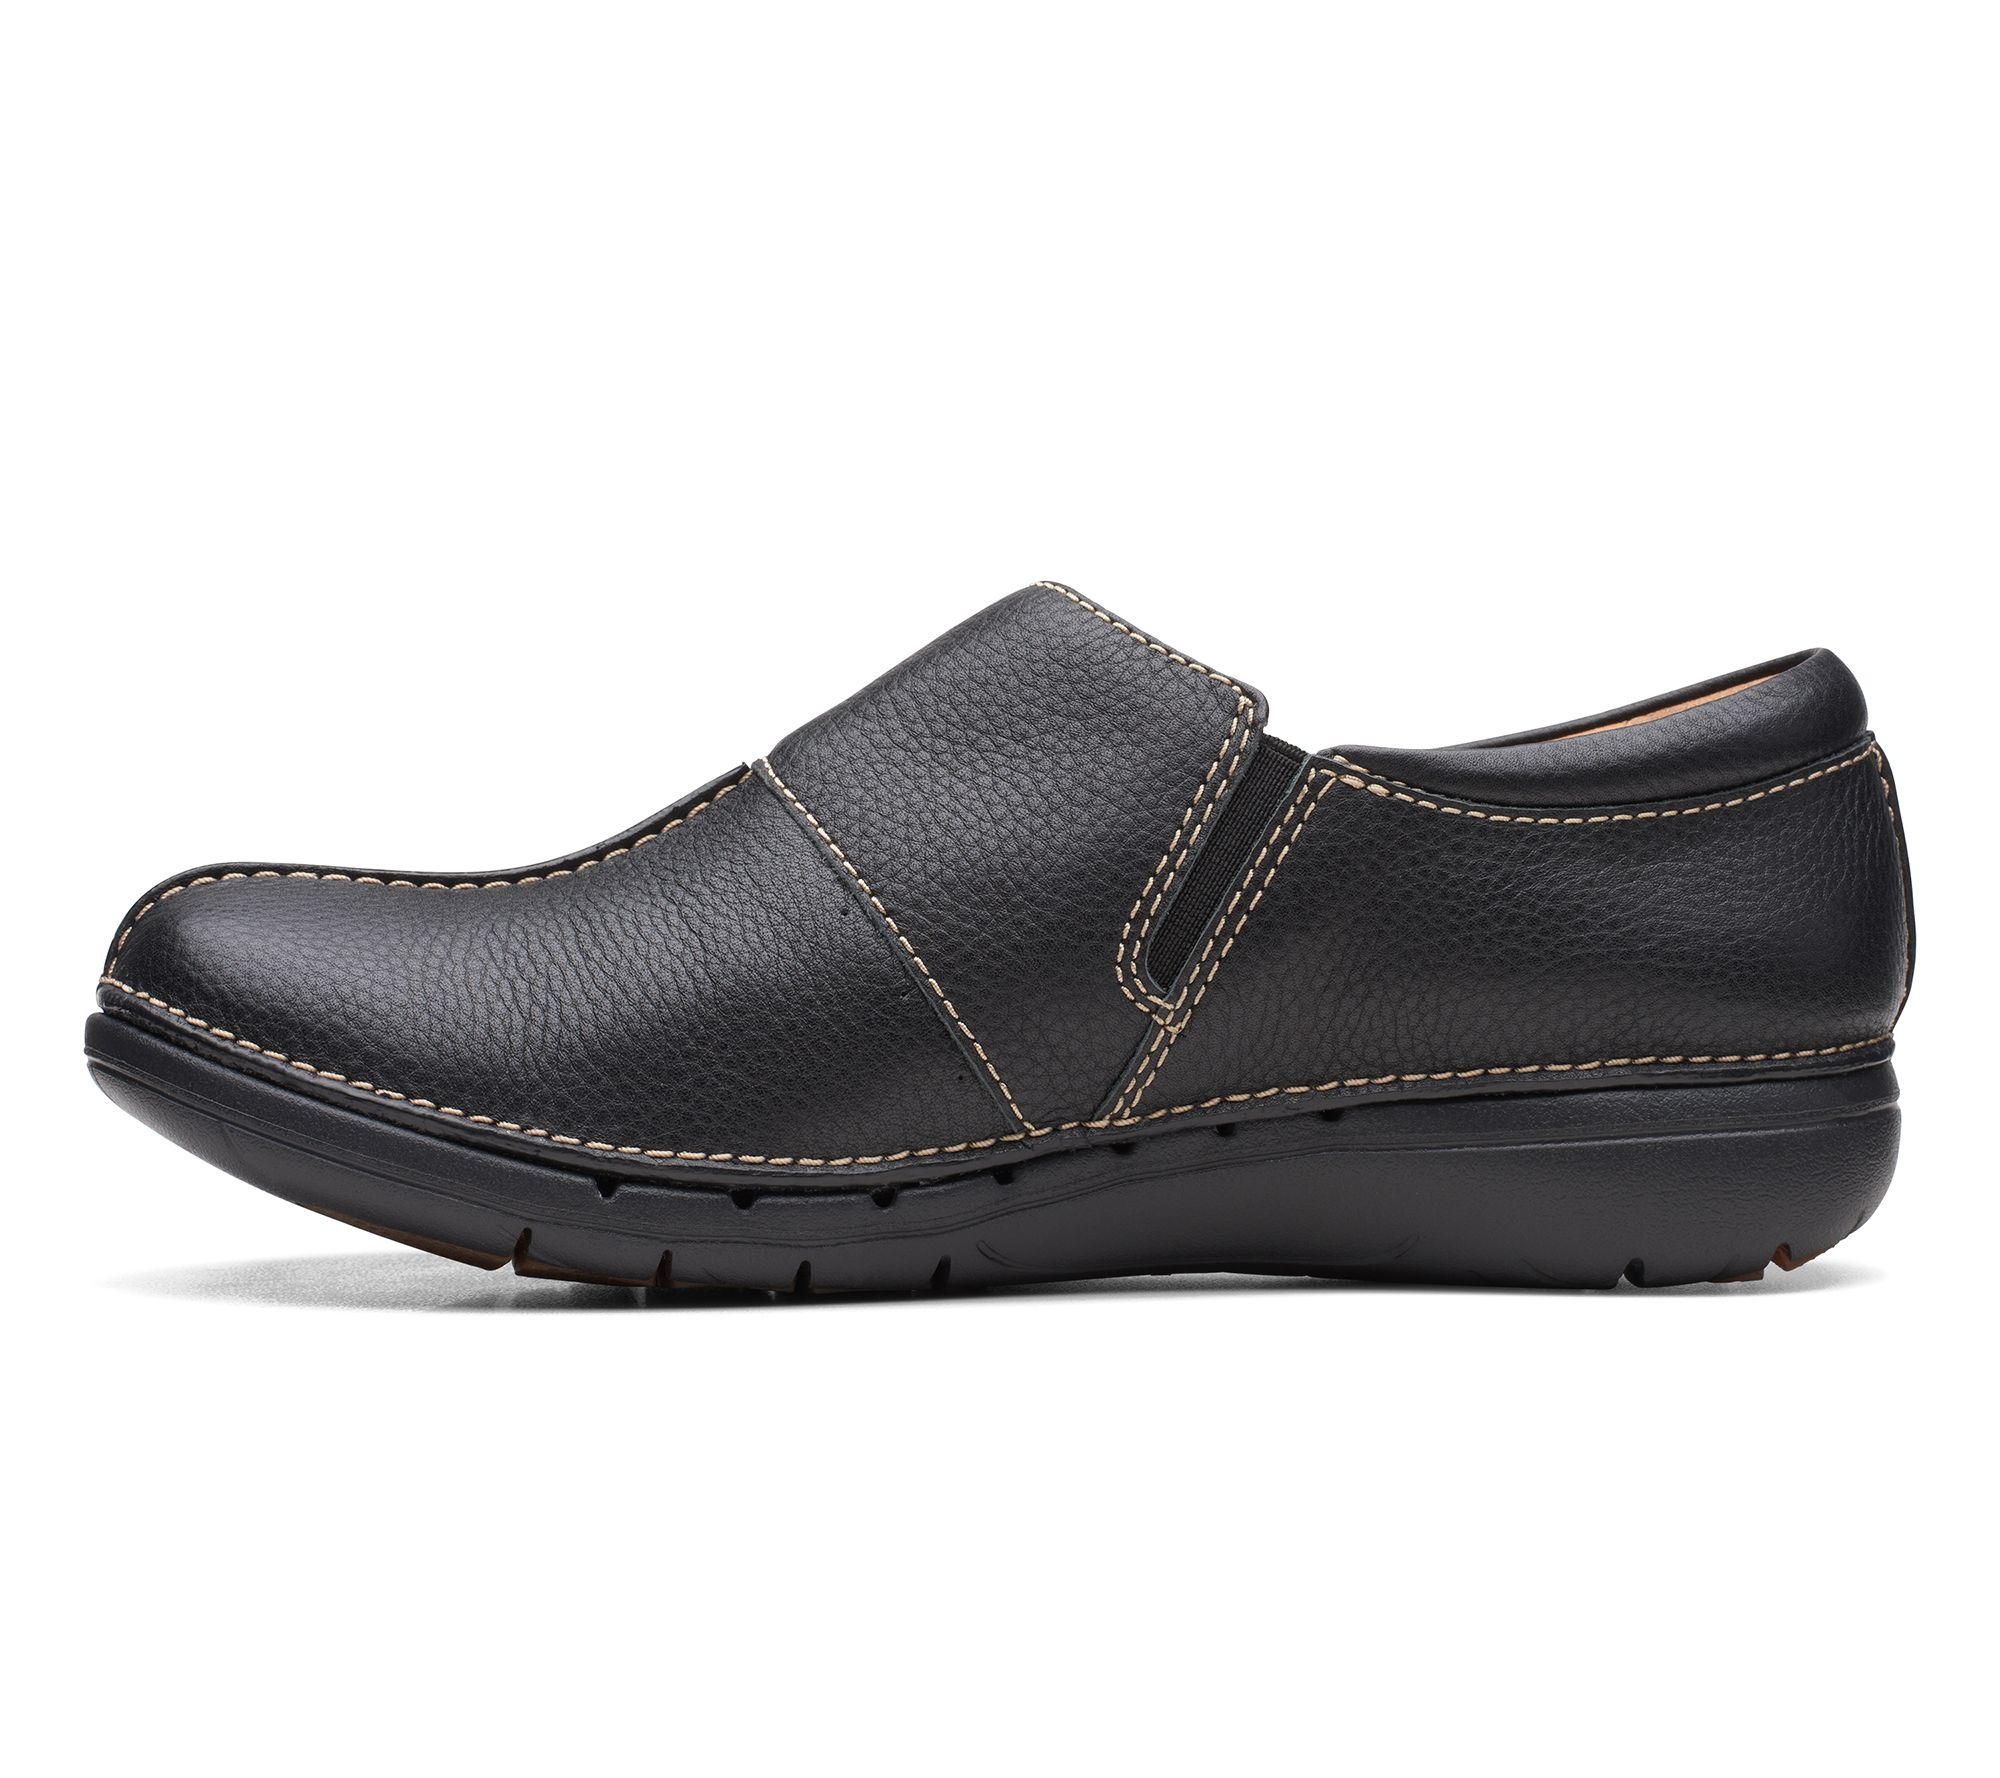 Clarks Unstructured Leather Slip-On Un Loop Ave - QVC.com